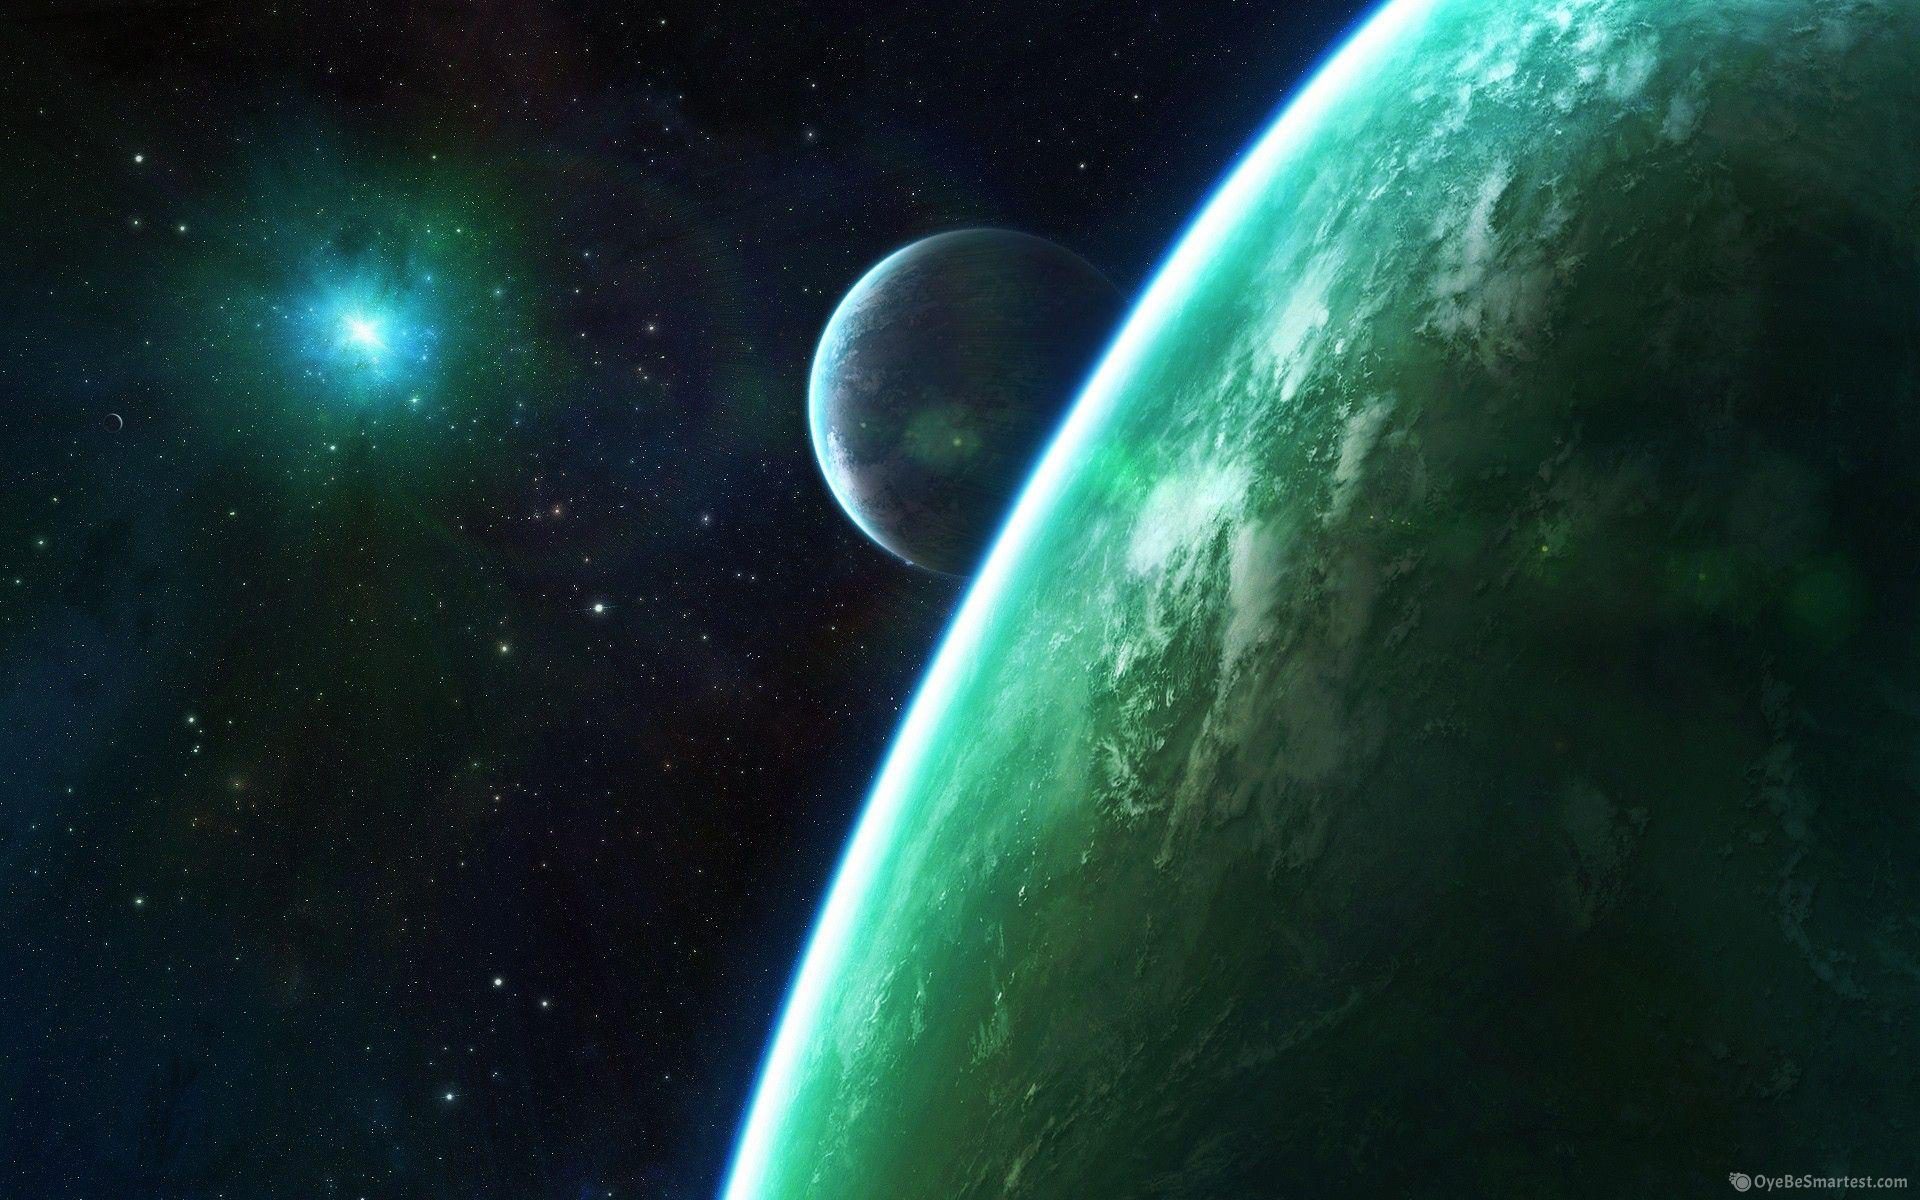 Star Wars Space Scenery Wallpapers